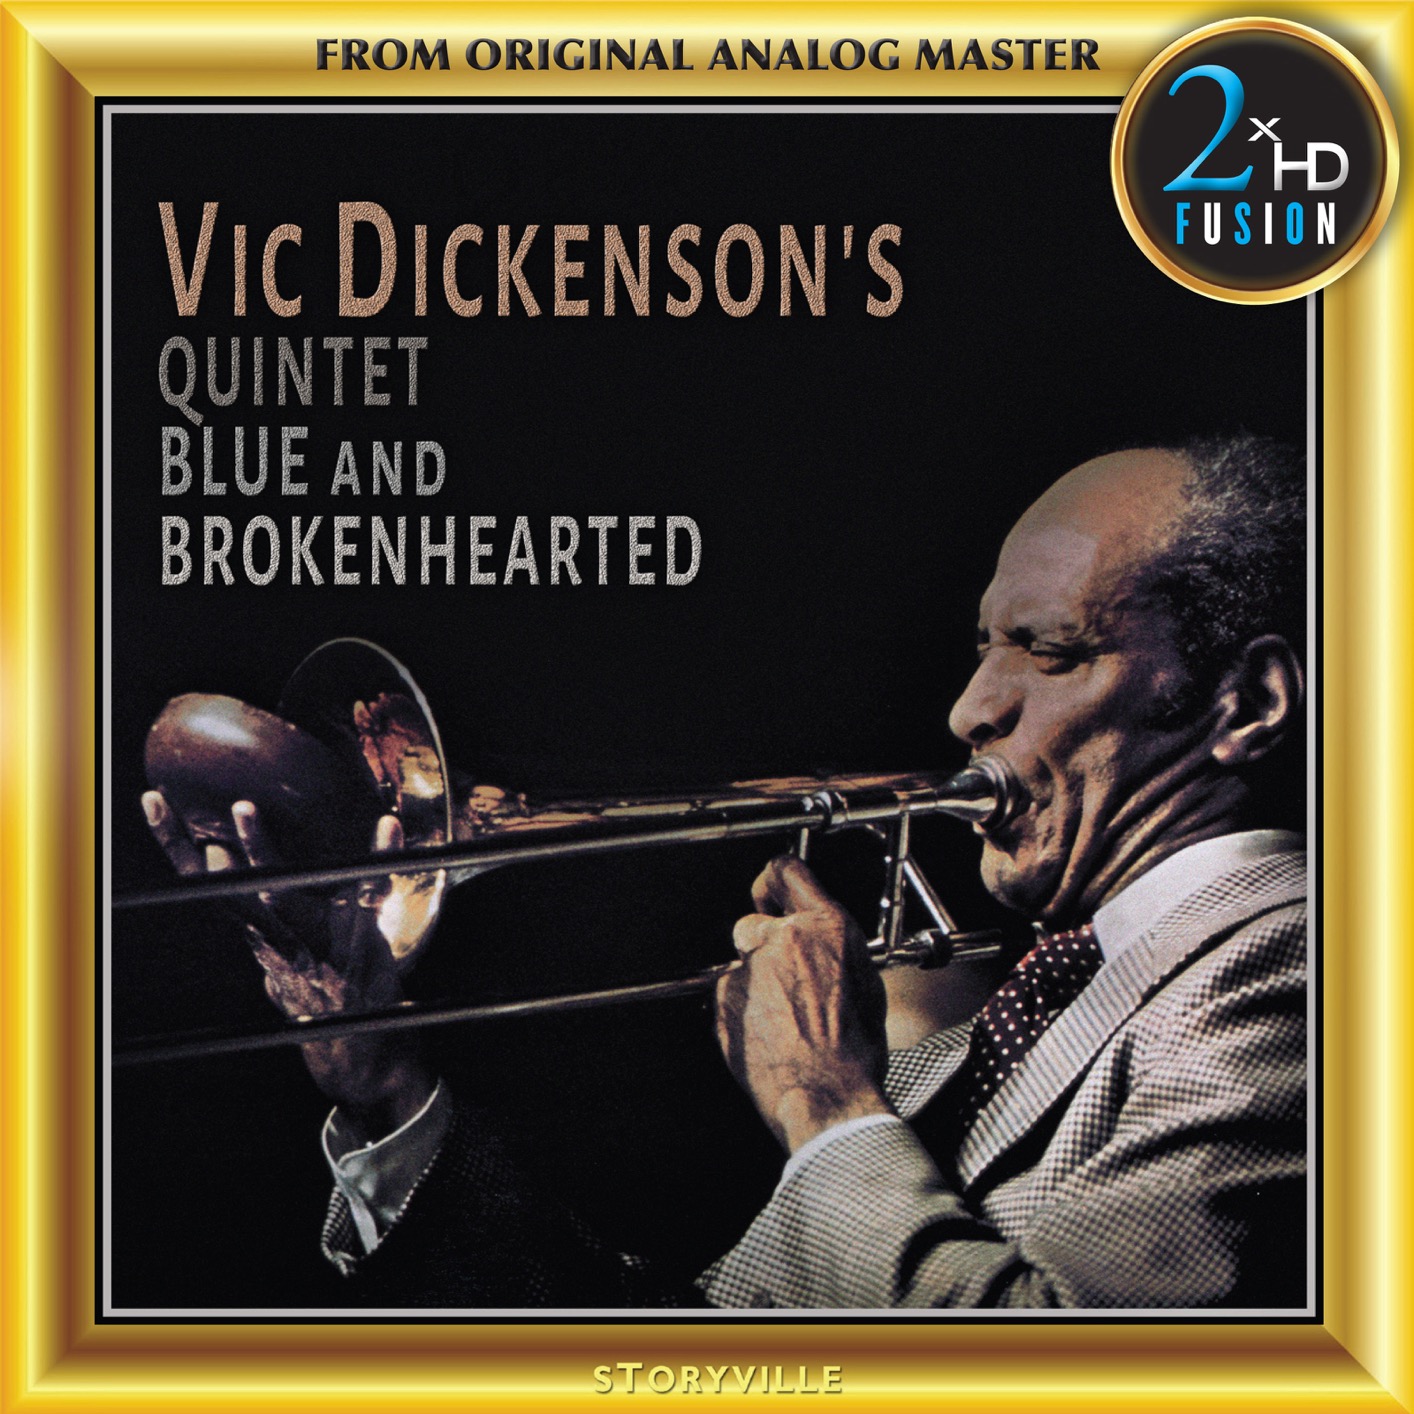 The Vic Dickenson Quintet – Blue and Brokenhearted (1981/2018) [FLAC 24bit/192kHz]